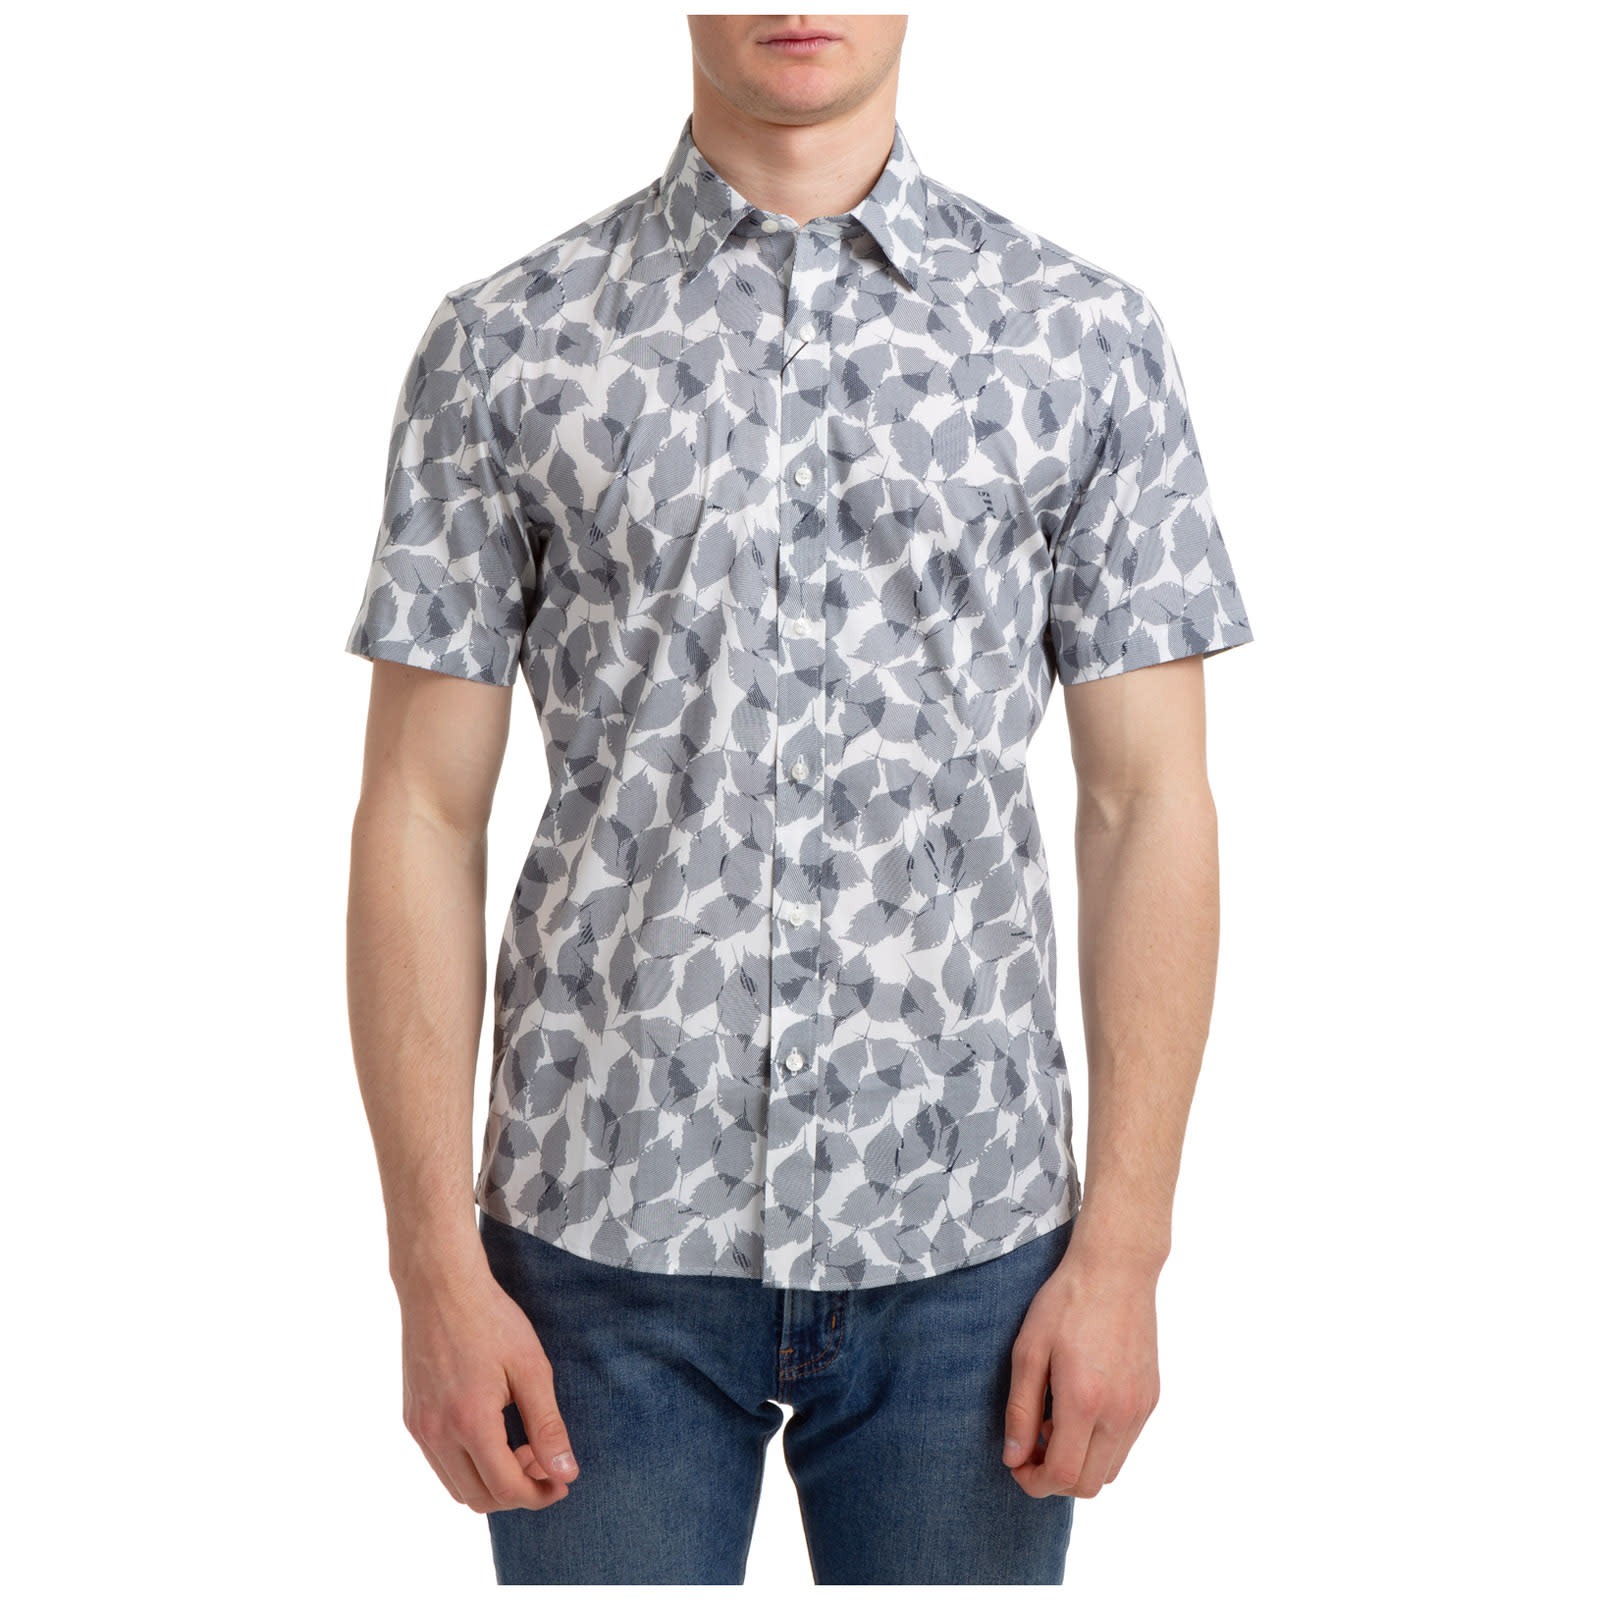 Michael Kors Grizzly Wings Short Sleeve Shirts